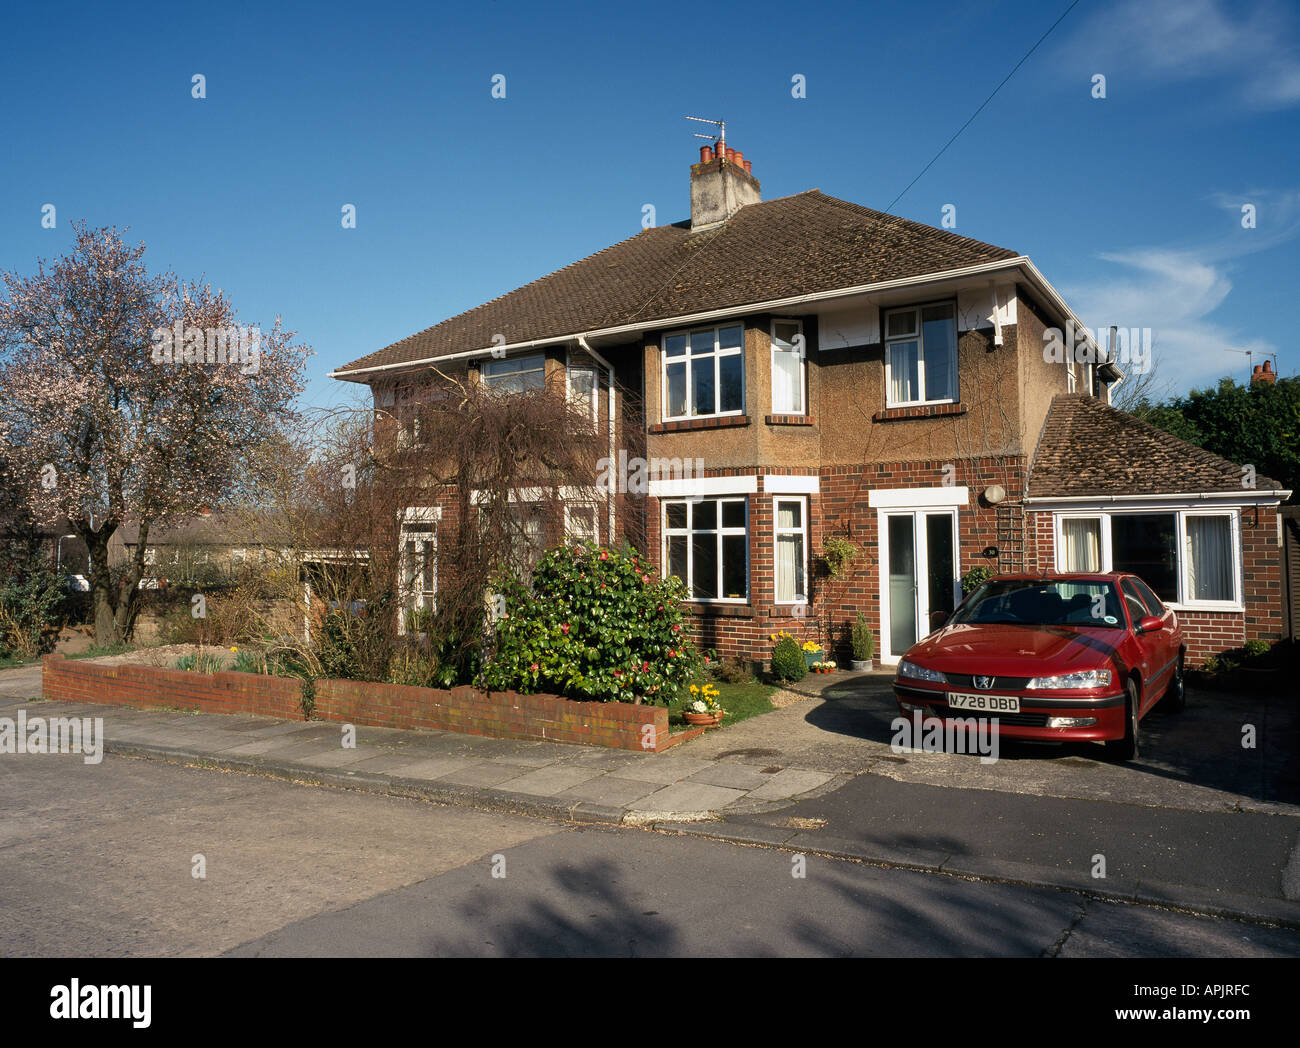 SUBURBAN SEMI DETACHED HOUSE WITH CAR IN DRIVE UK Stock Photo